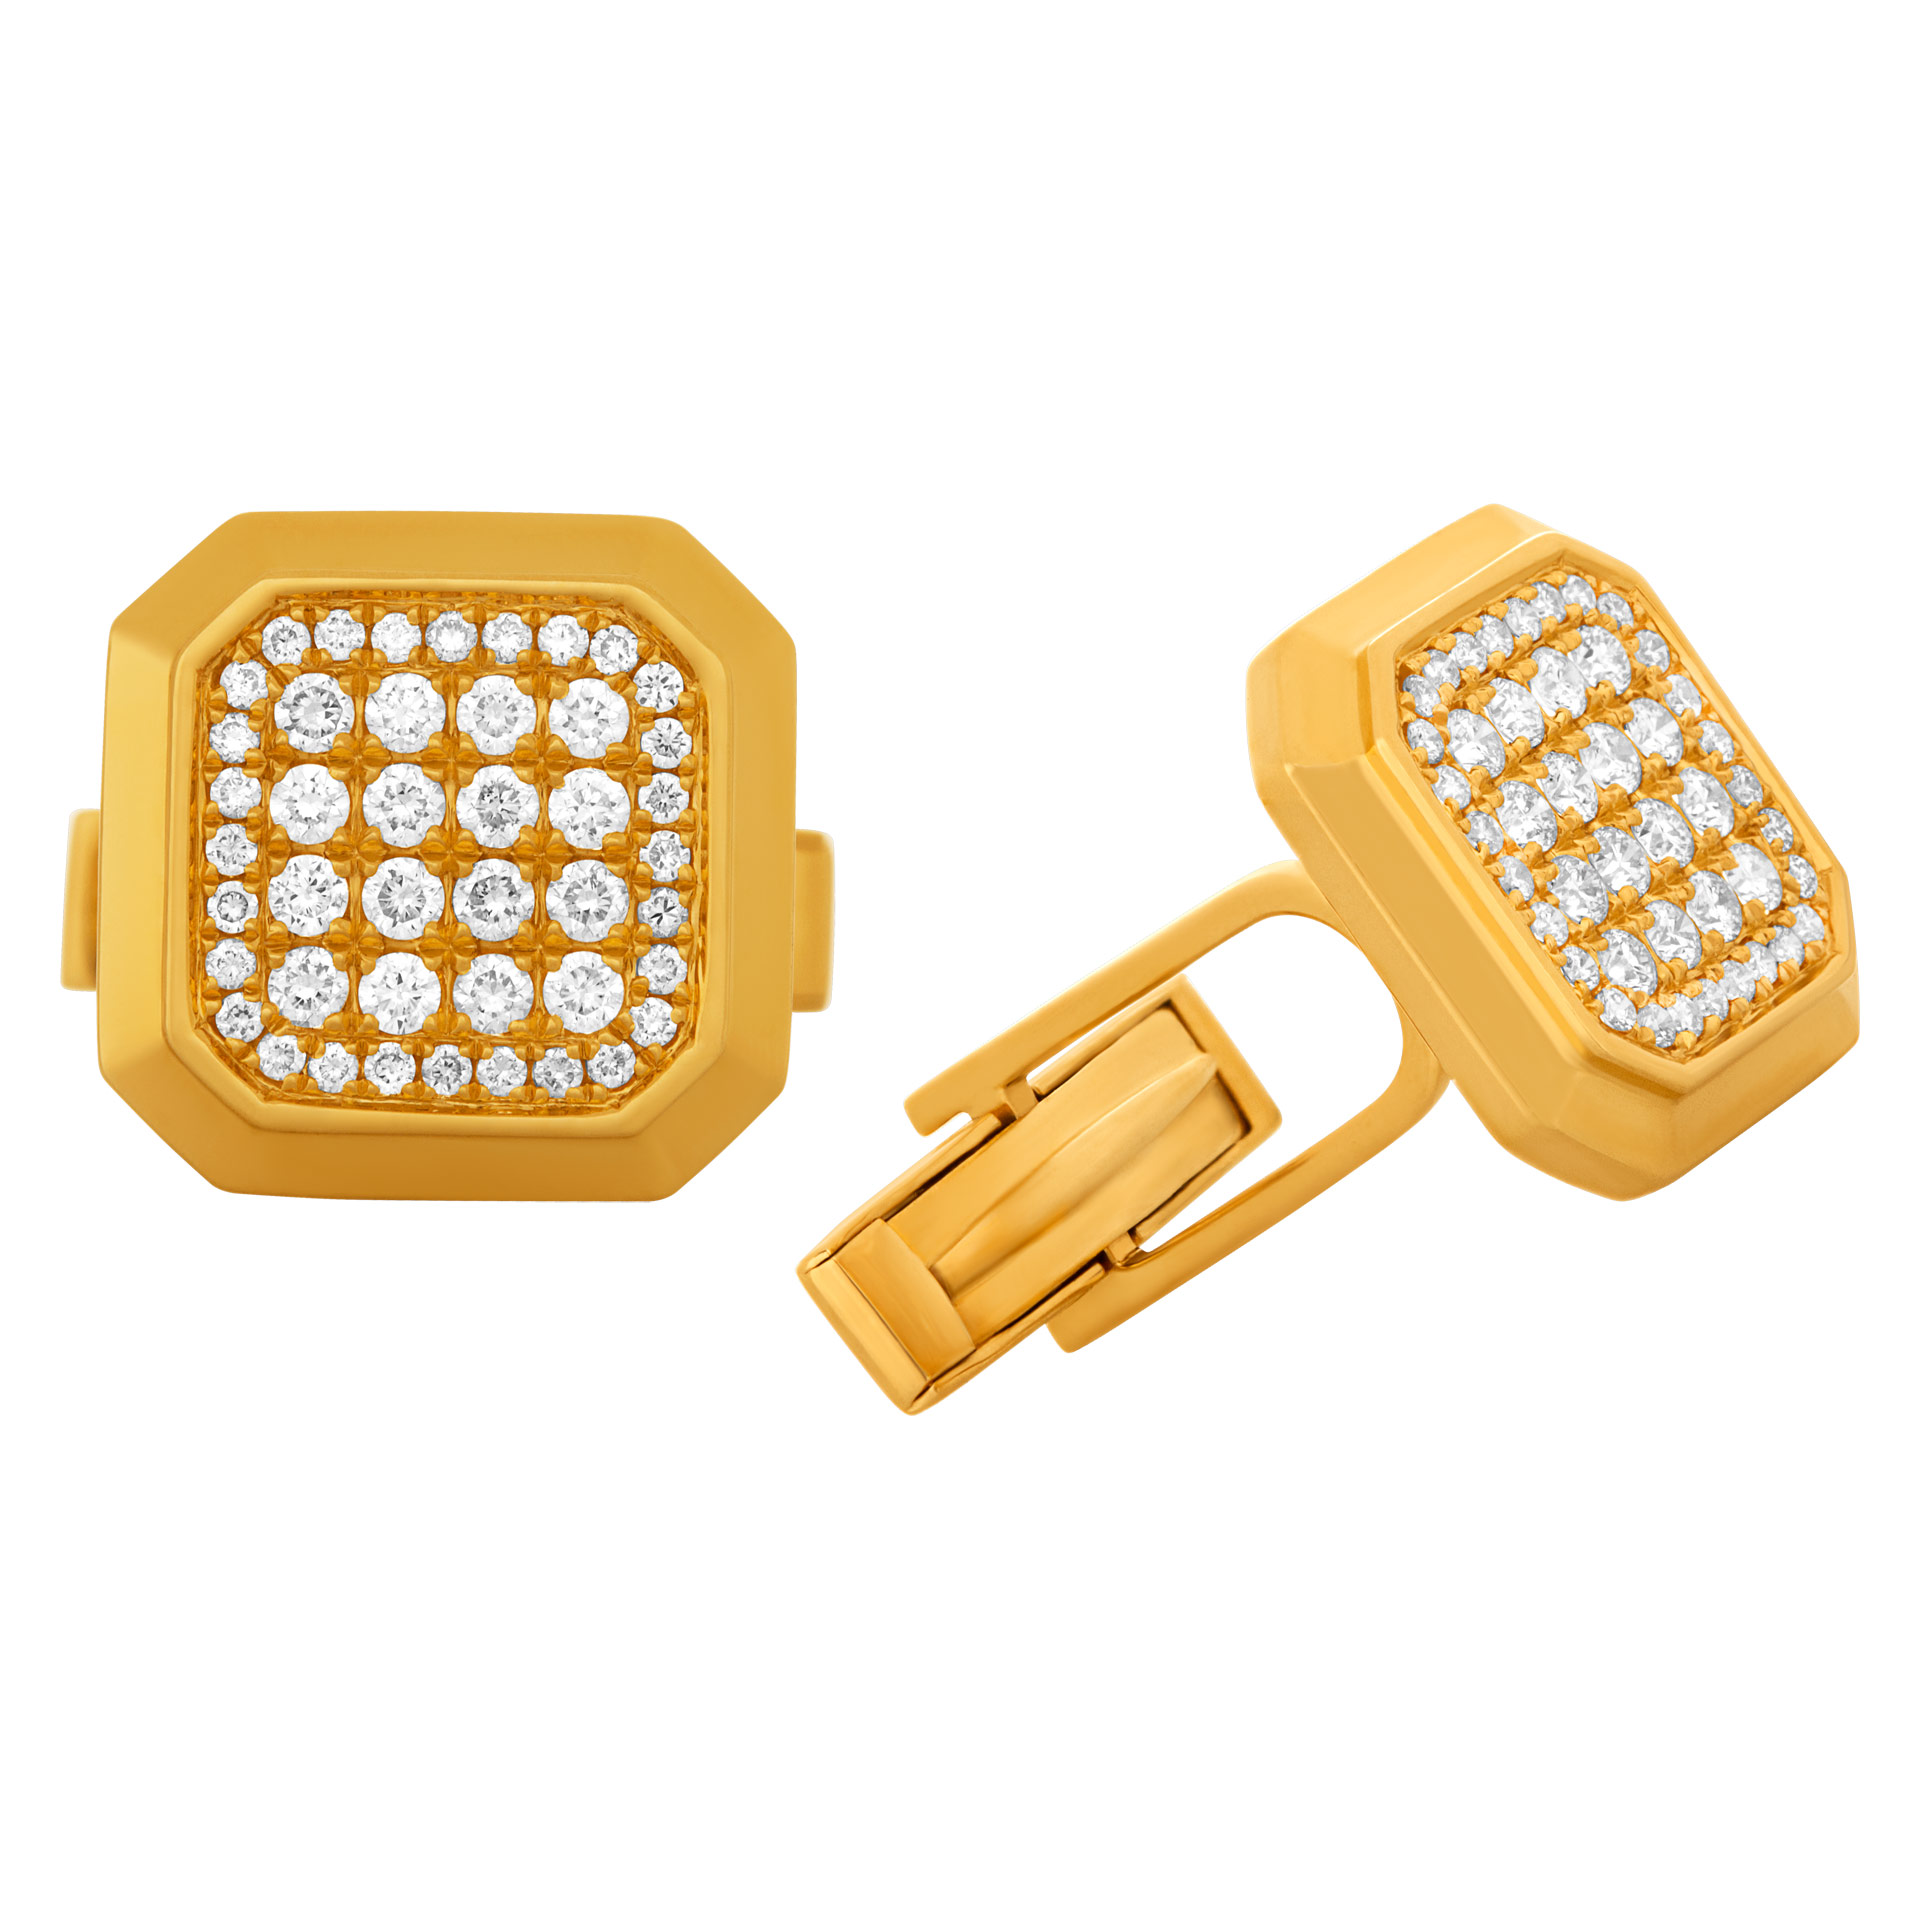 Handsome 18k yellow gold and diamonds cufflinks with app. 1.12 carats in white clean diamonds.